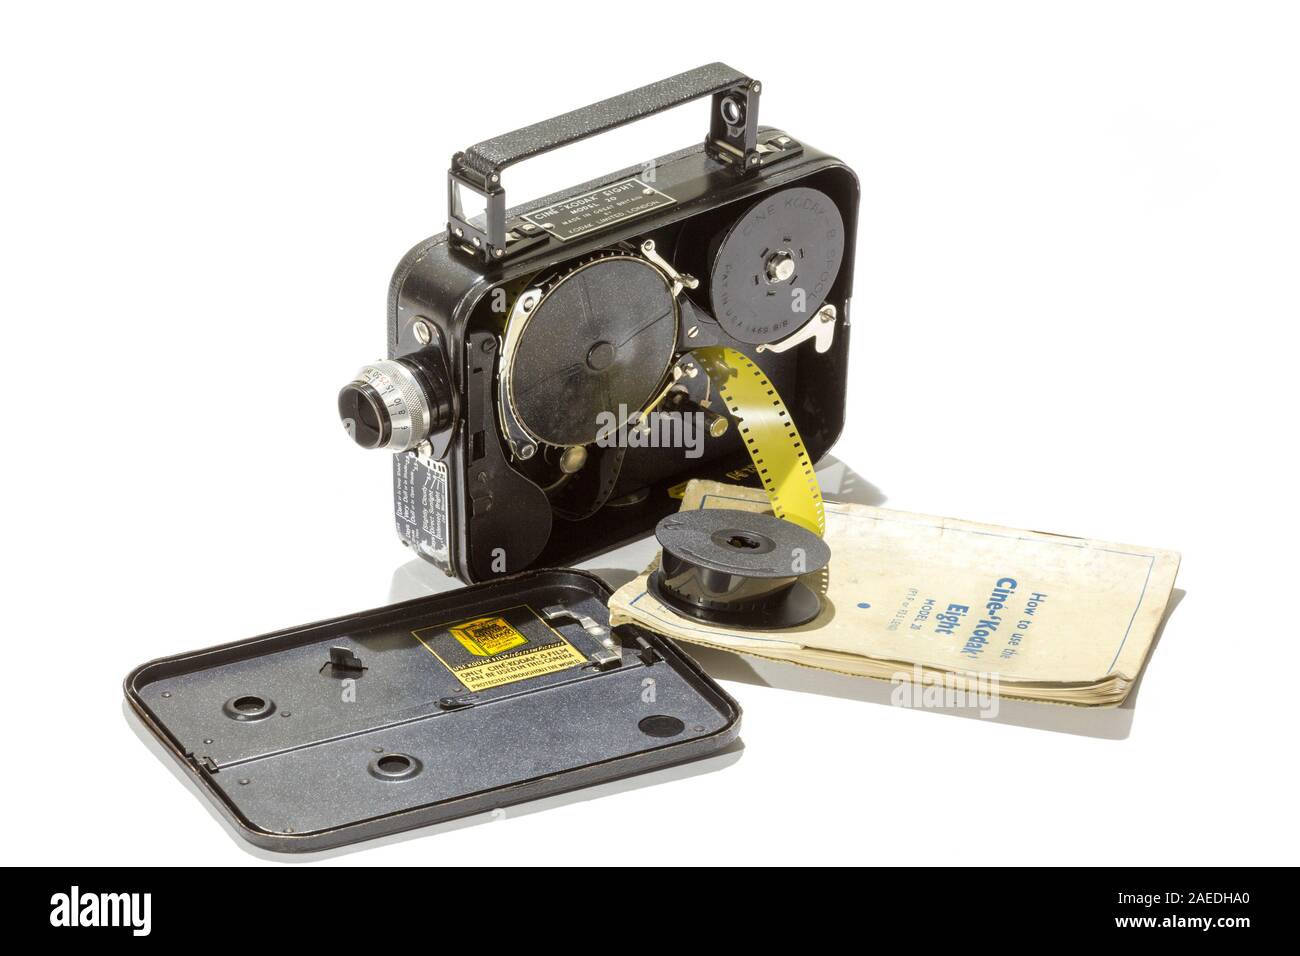 Cine Kodak Eight model 20 8mm film camera from the 1930s. With a roll of 8mm film and instruction book. Amateur camera used in the 1930's and 1940s'. Stock Photo